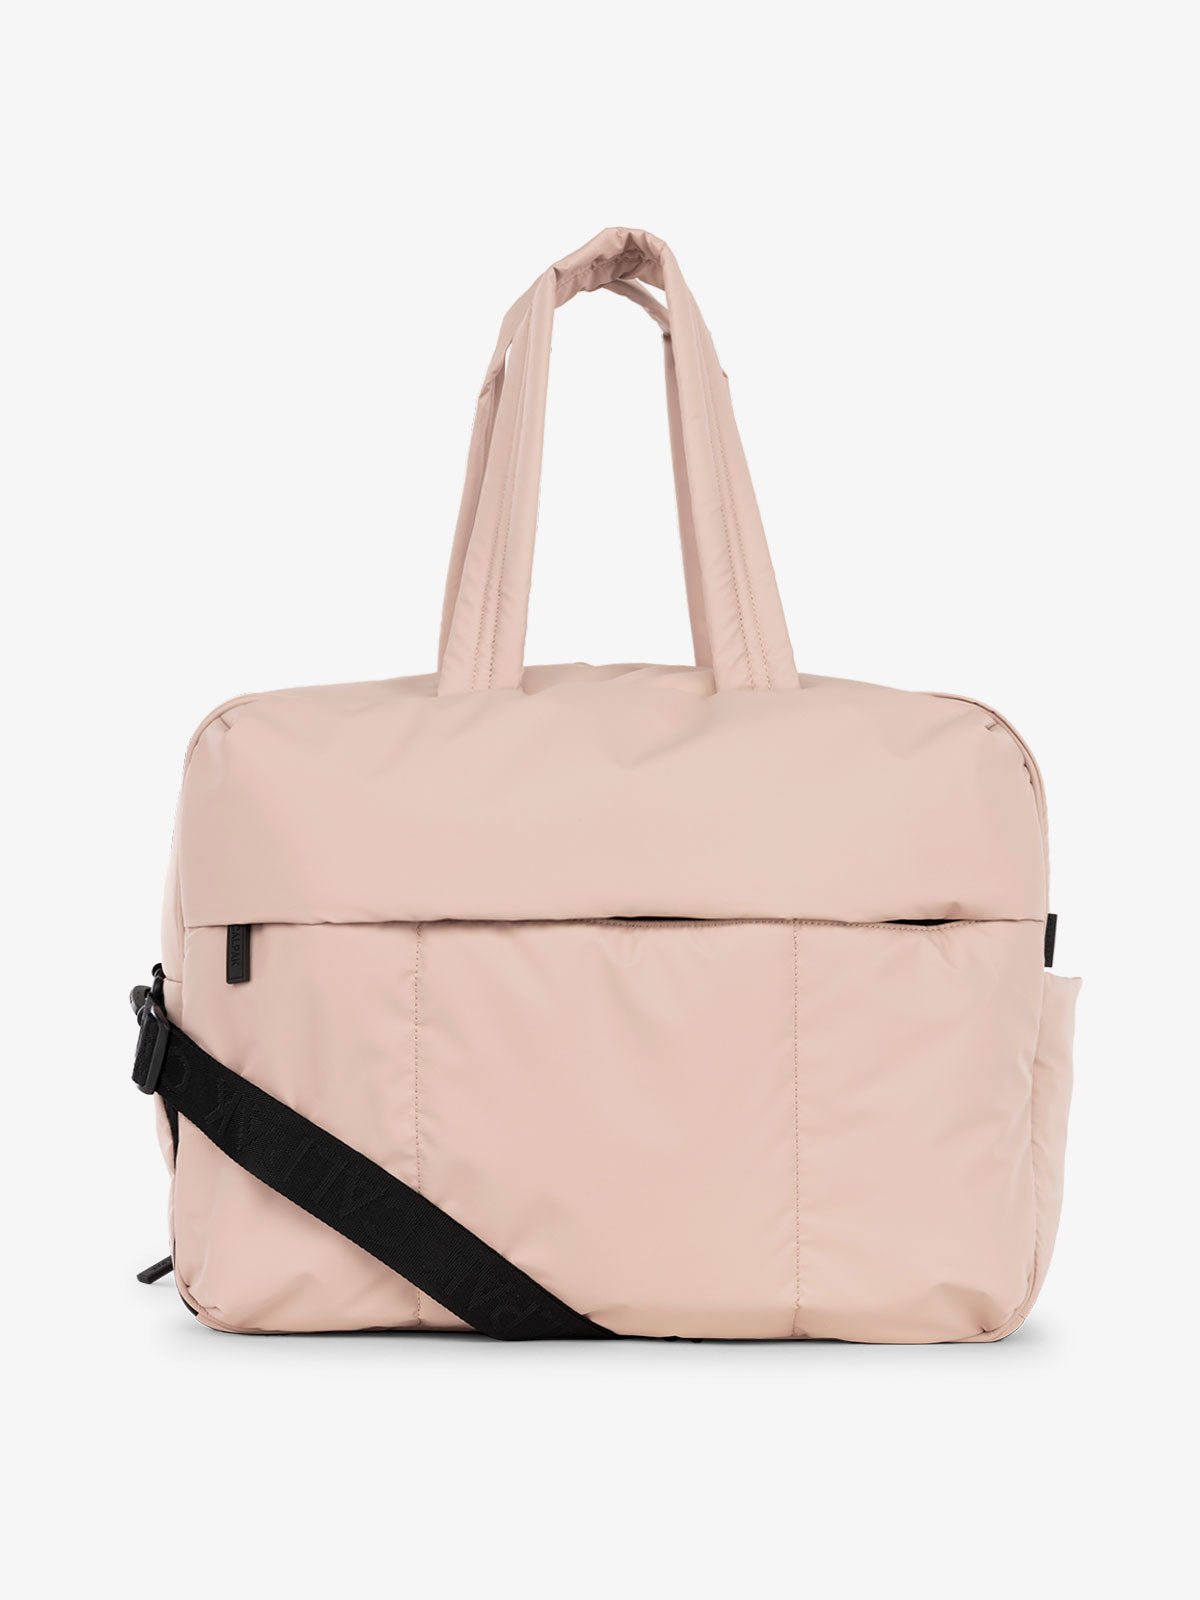 CALPAK Luka large duffle bag with detachable strap and zippered front pocket in rose quartz